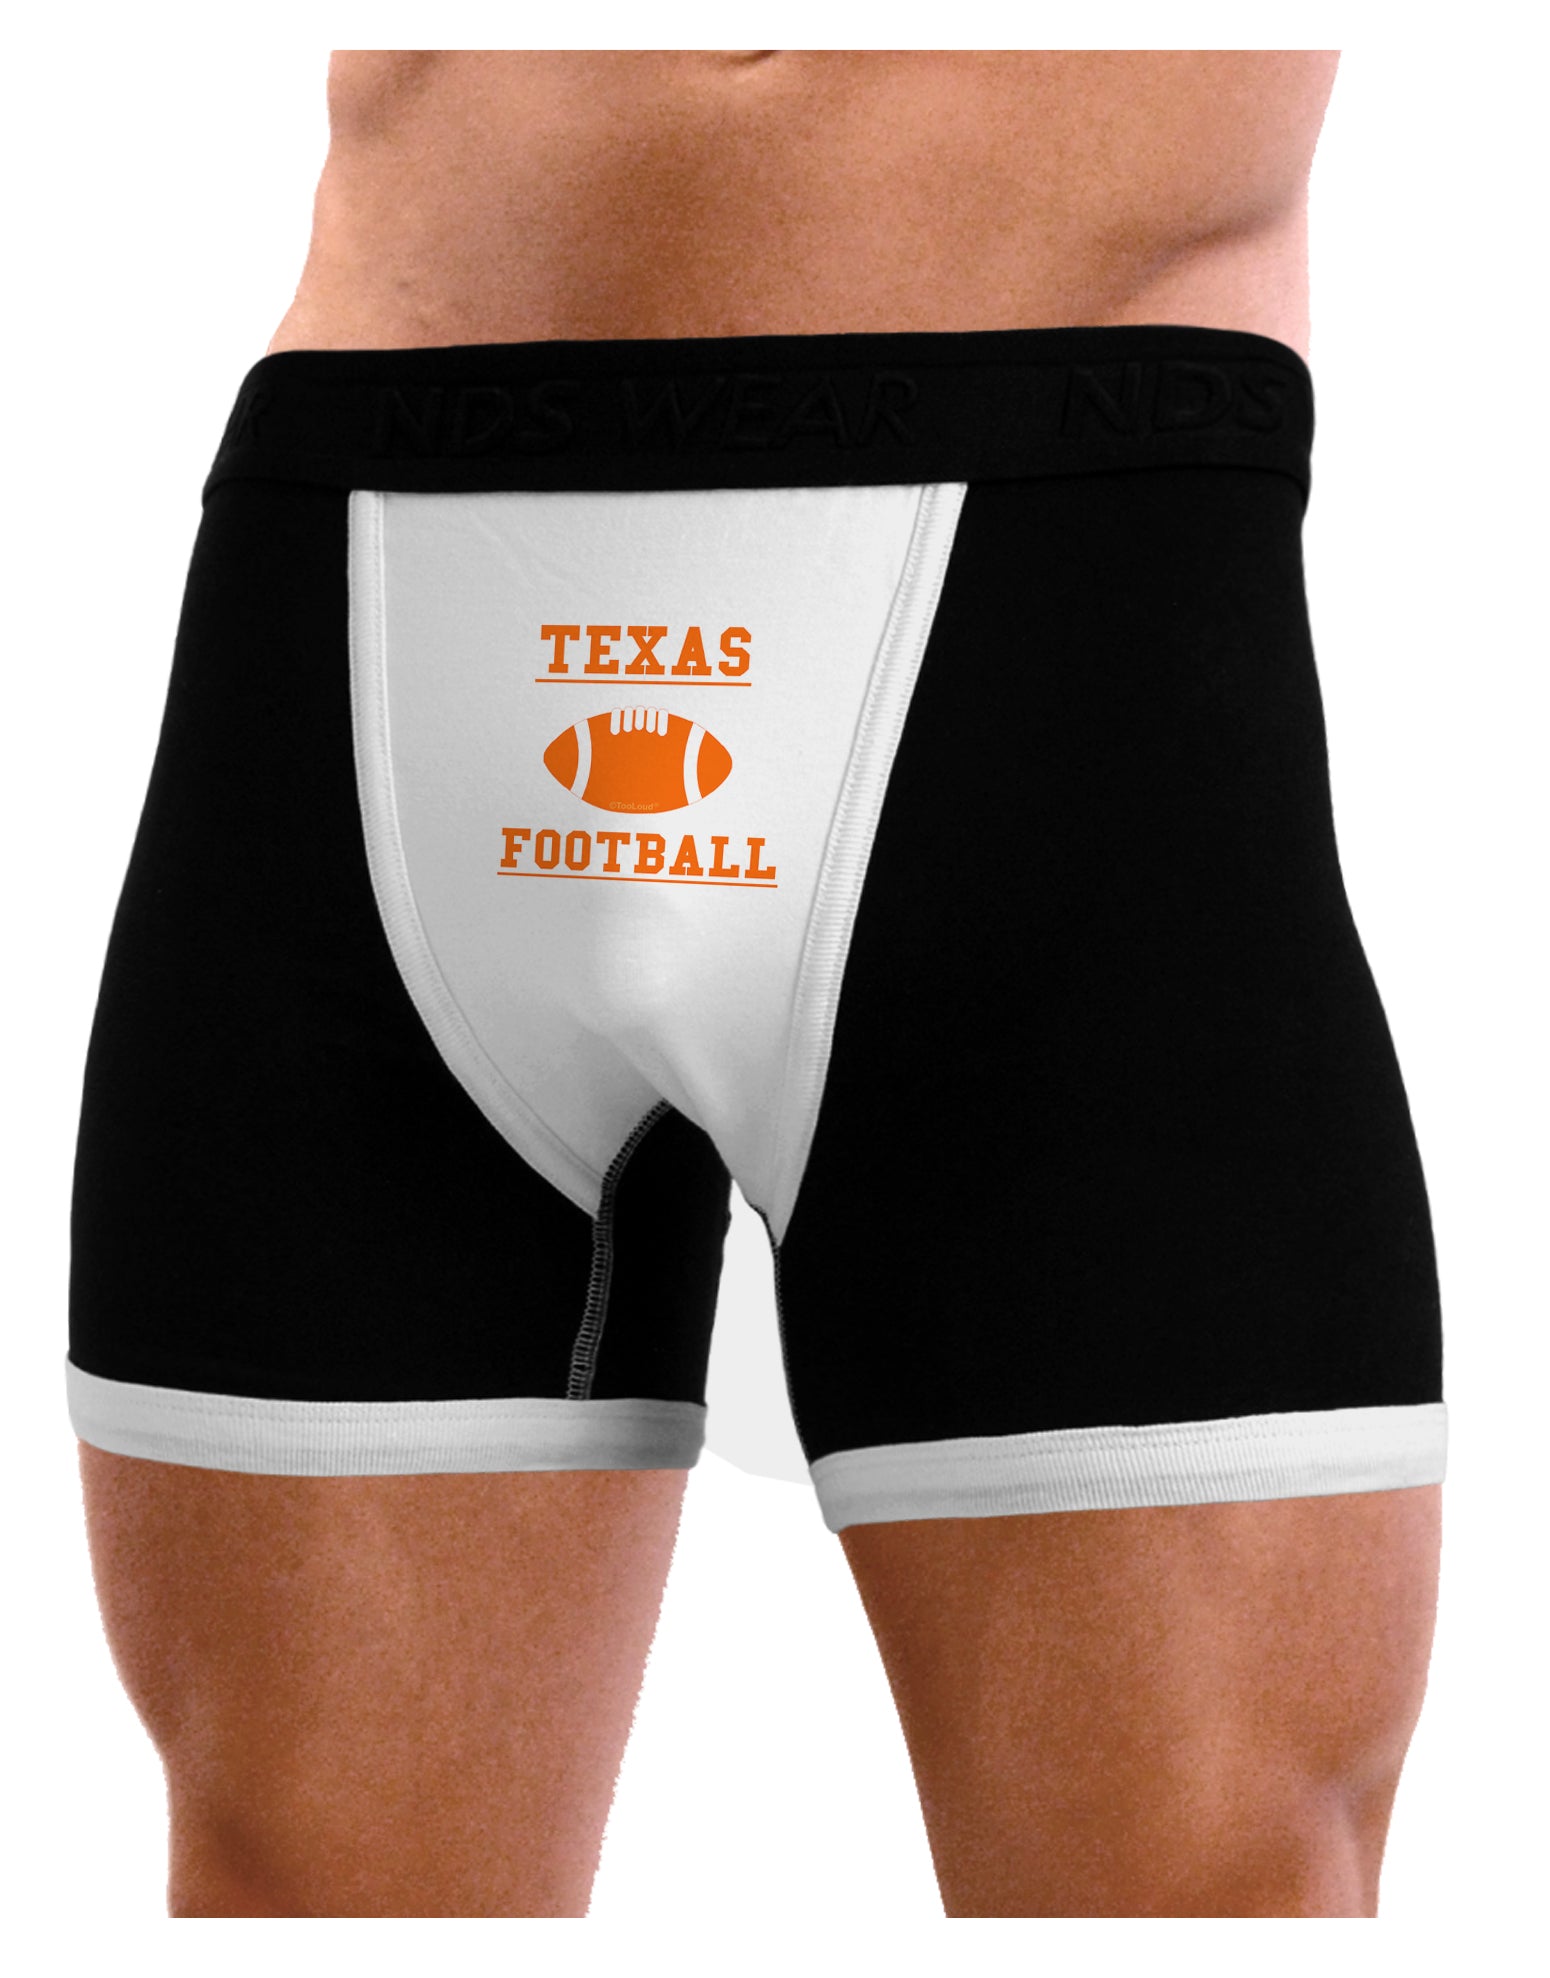 Texas Football Mens NDS Wear Boxer Brief Underwear by TooLoud